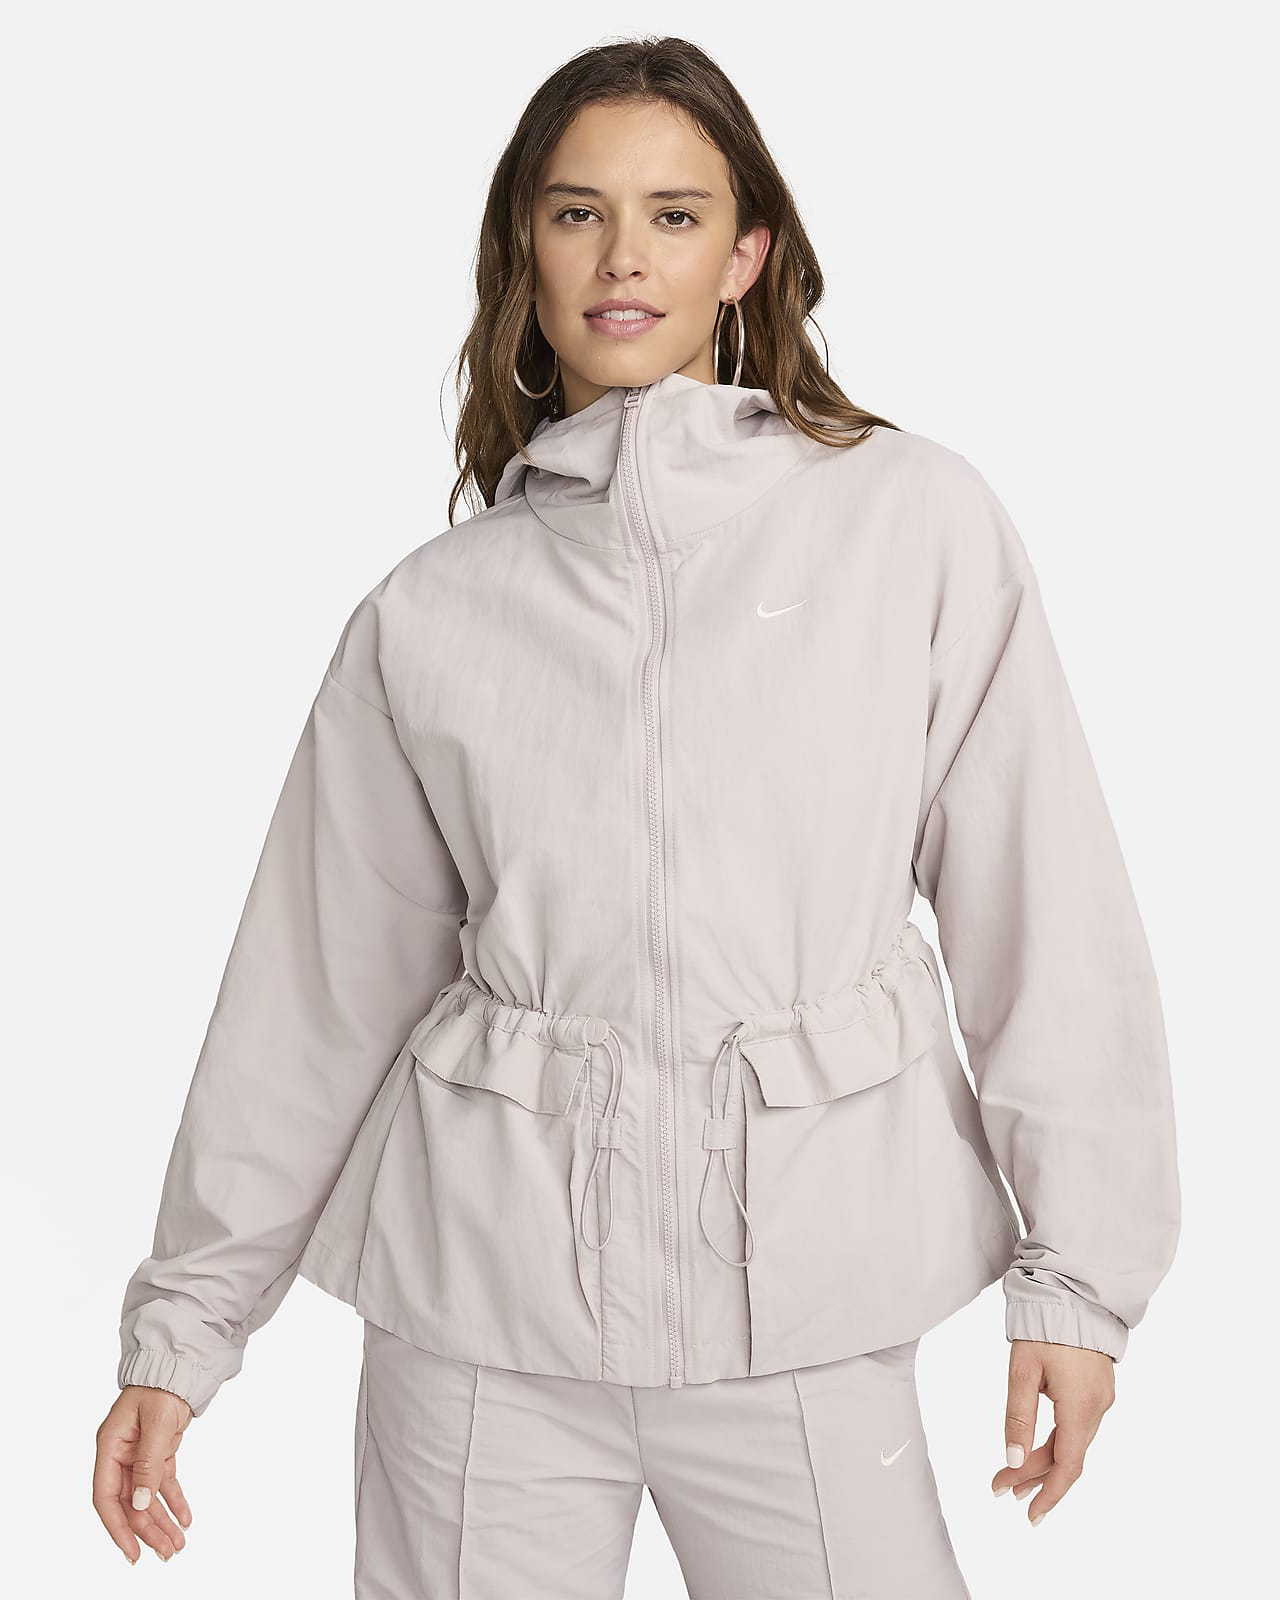 https://static.nike.com/a/images/t_PDP_1280_v1/f_auto,q_auto:eco/76e81880-7fff-4815-ae66-710180f693c1/sportswear-everything-wovens-oversized-hooded-jacket-zfMCxP.png